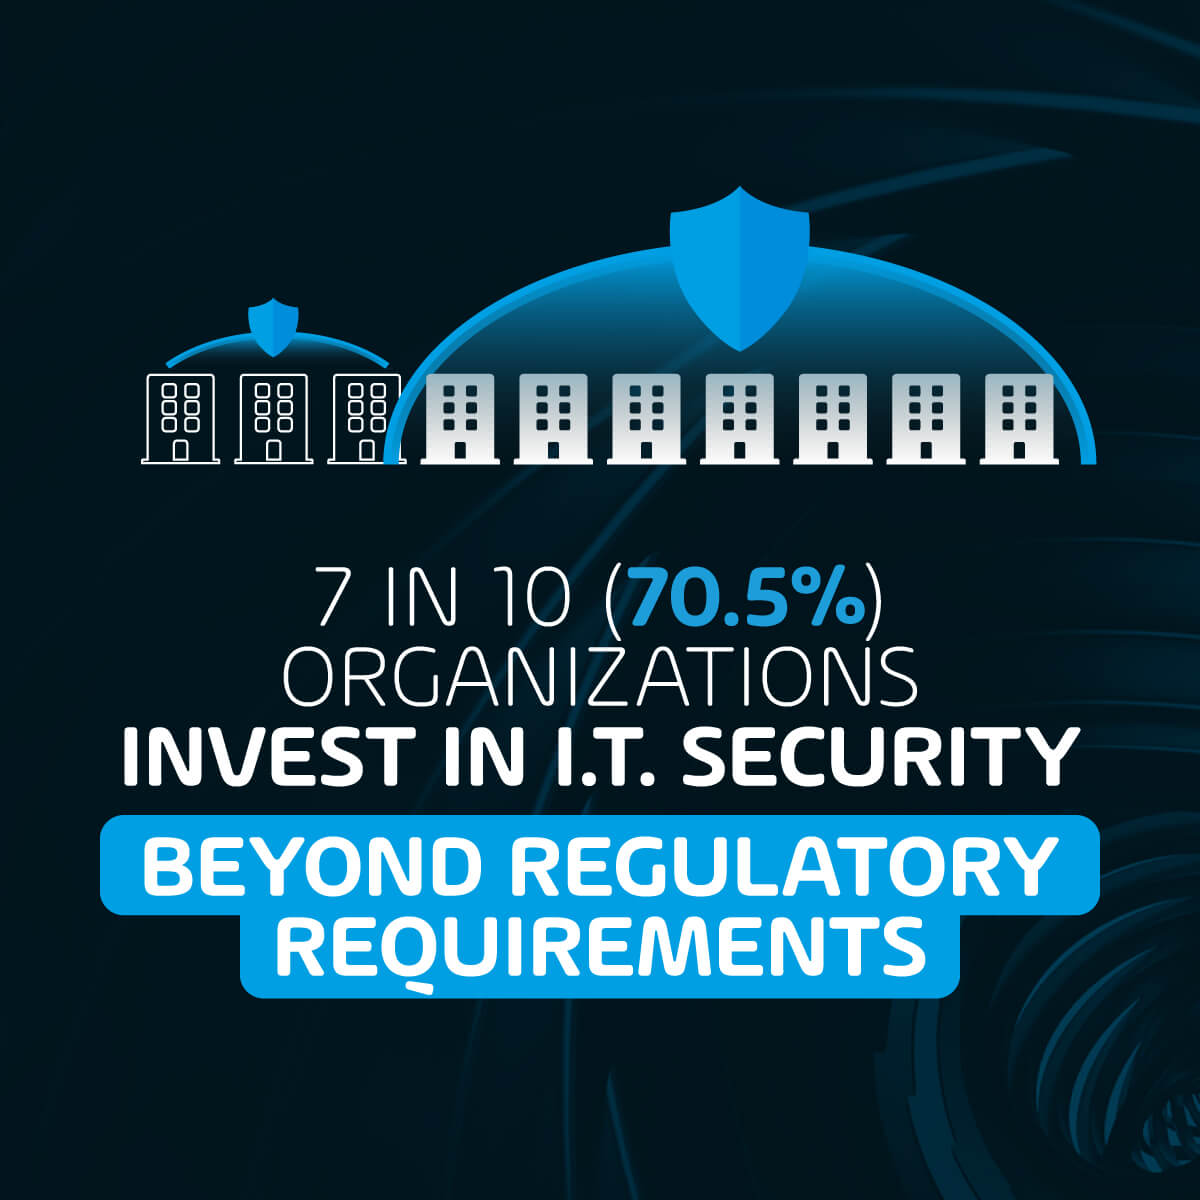 7 in 10 (70.5%) organizations invest in IT security beyond regulatory requirements